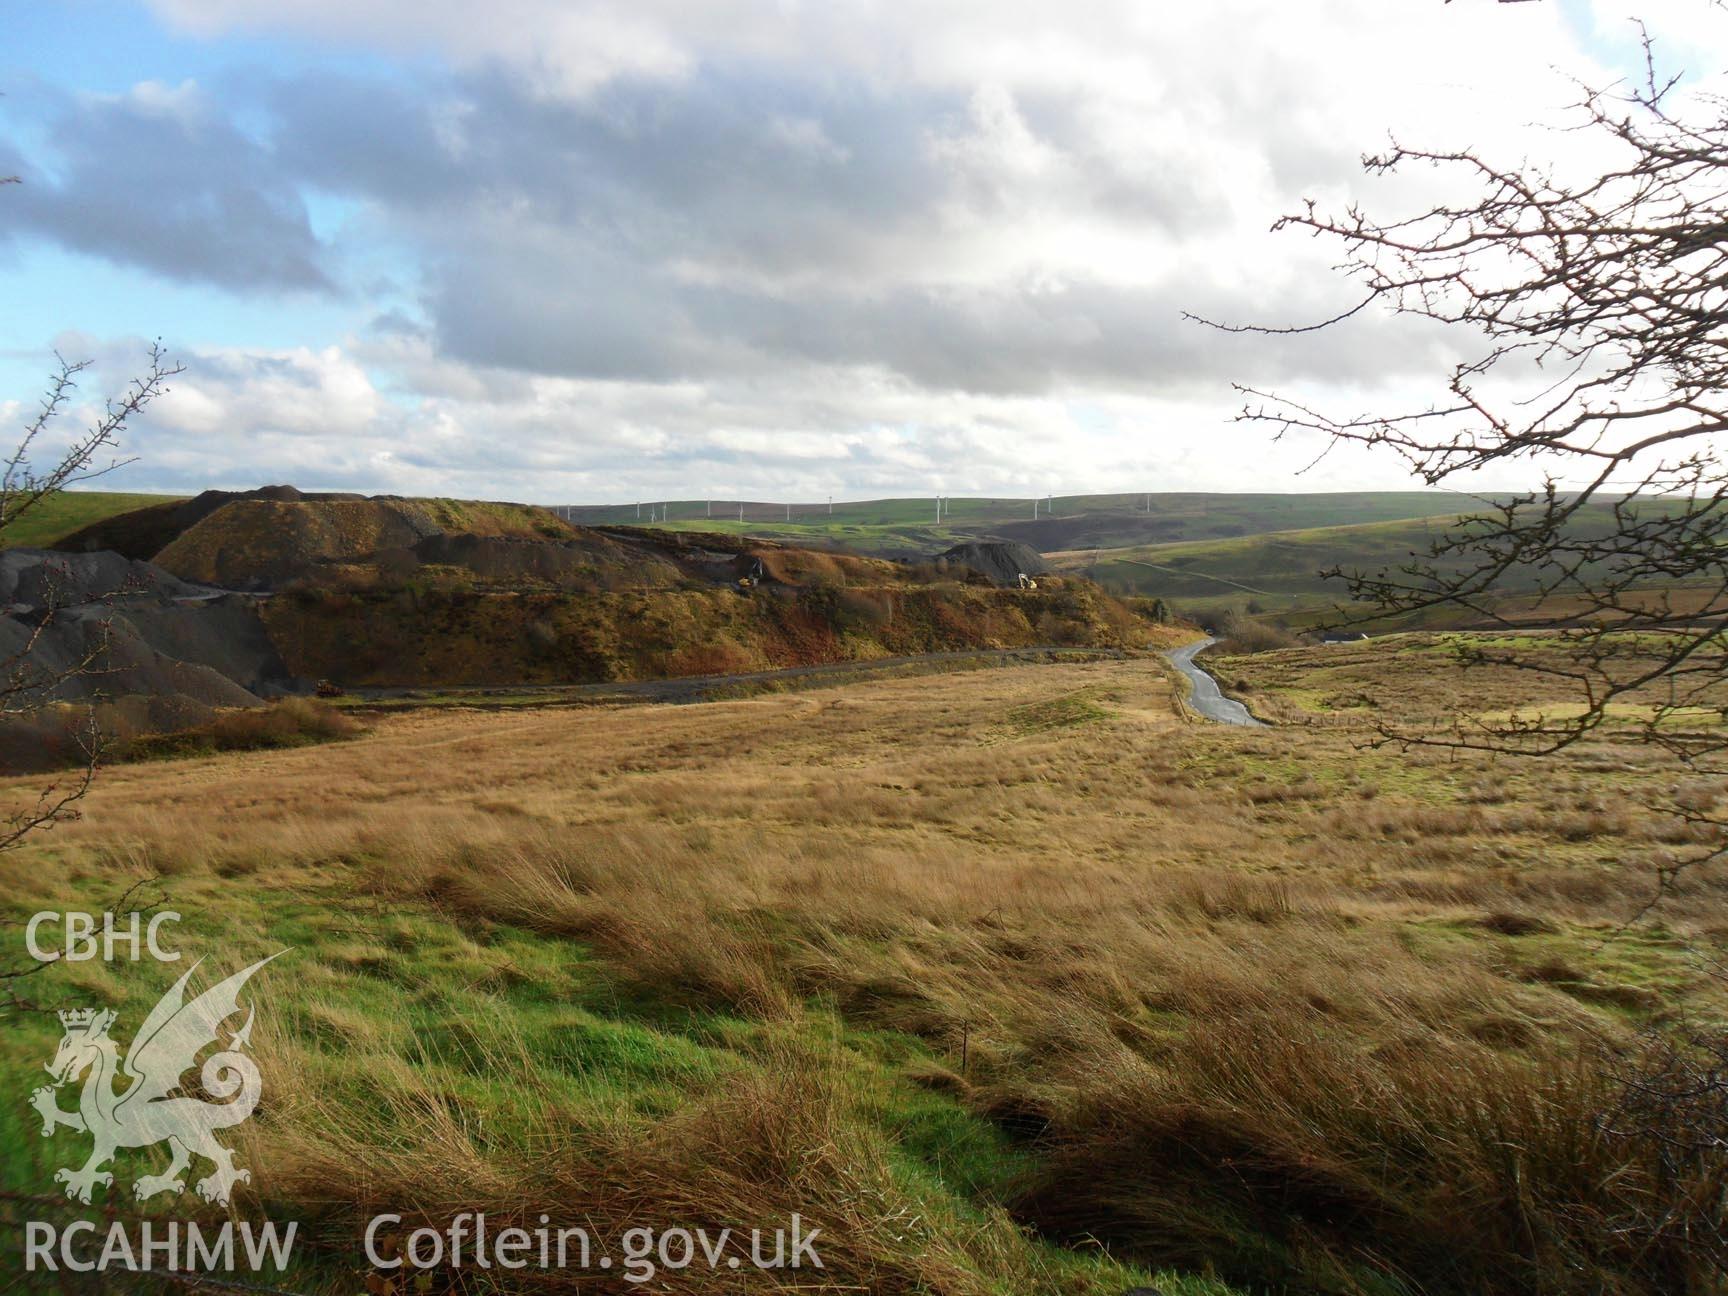 Digital colour photograph showing view of western end of assessment area, looking south, Tan y Foel Quarry, Cefn Coch, report no. 1089.